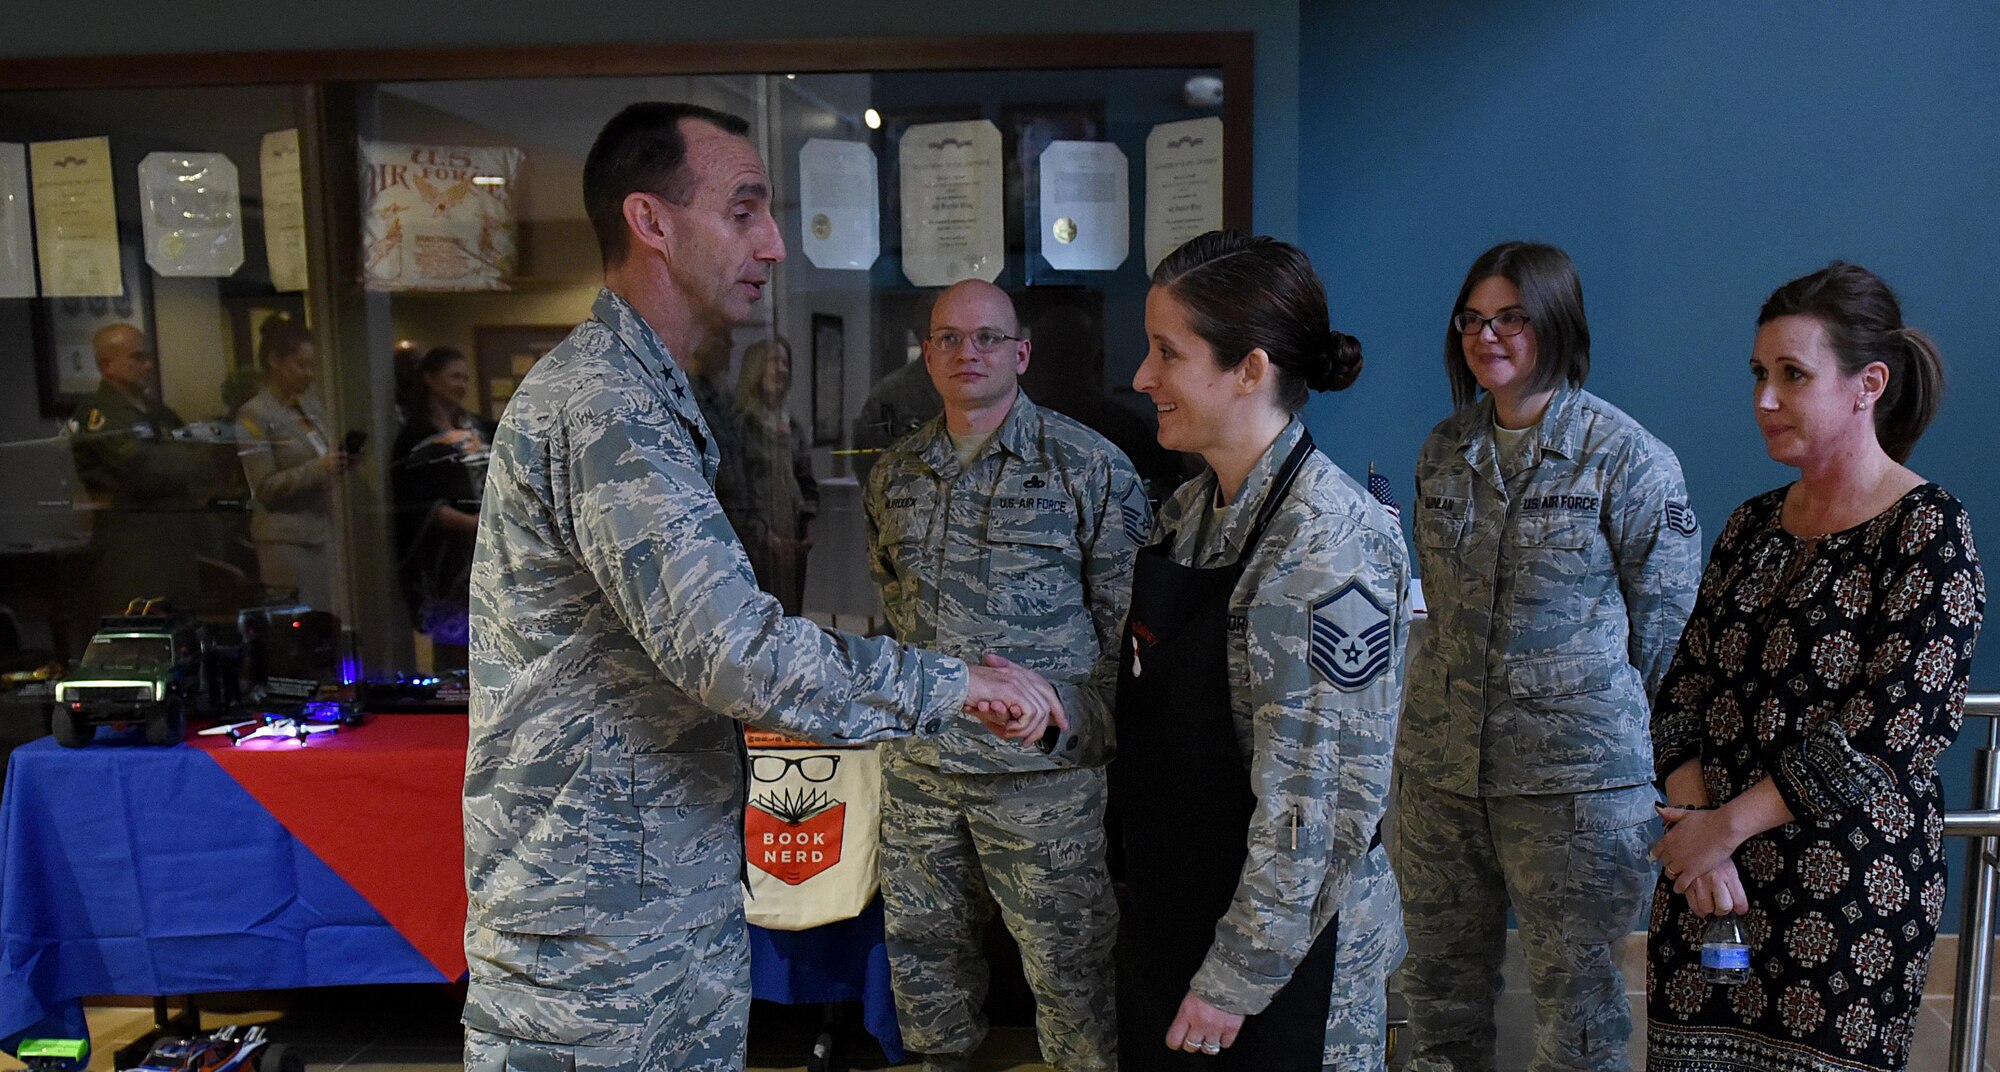 U.S. Air Force Maj. Gen. Scott Zobrist (left), 9th Air Force commander, coins Master Sgt. Katie Neeley, 4th Aerospace Medicine Squadron superintendent at Seymour Johnson Air Force Base, N.C., Feb. 15, 2017. Neeley is the president of the Make It Better culinary club. (U.S. Air Force photo by Airman 1st Class Kenneth Boyton)